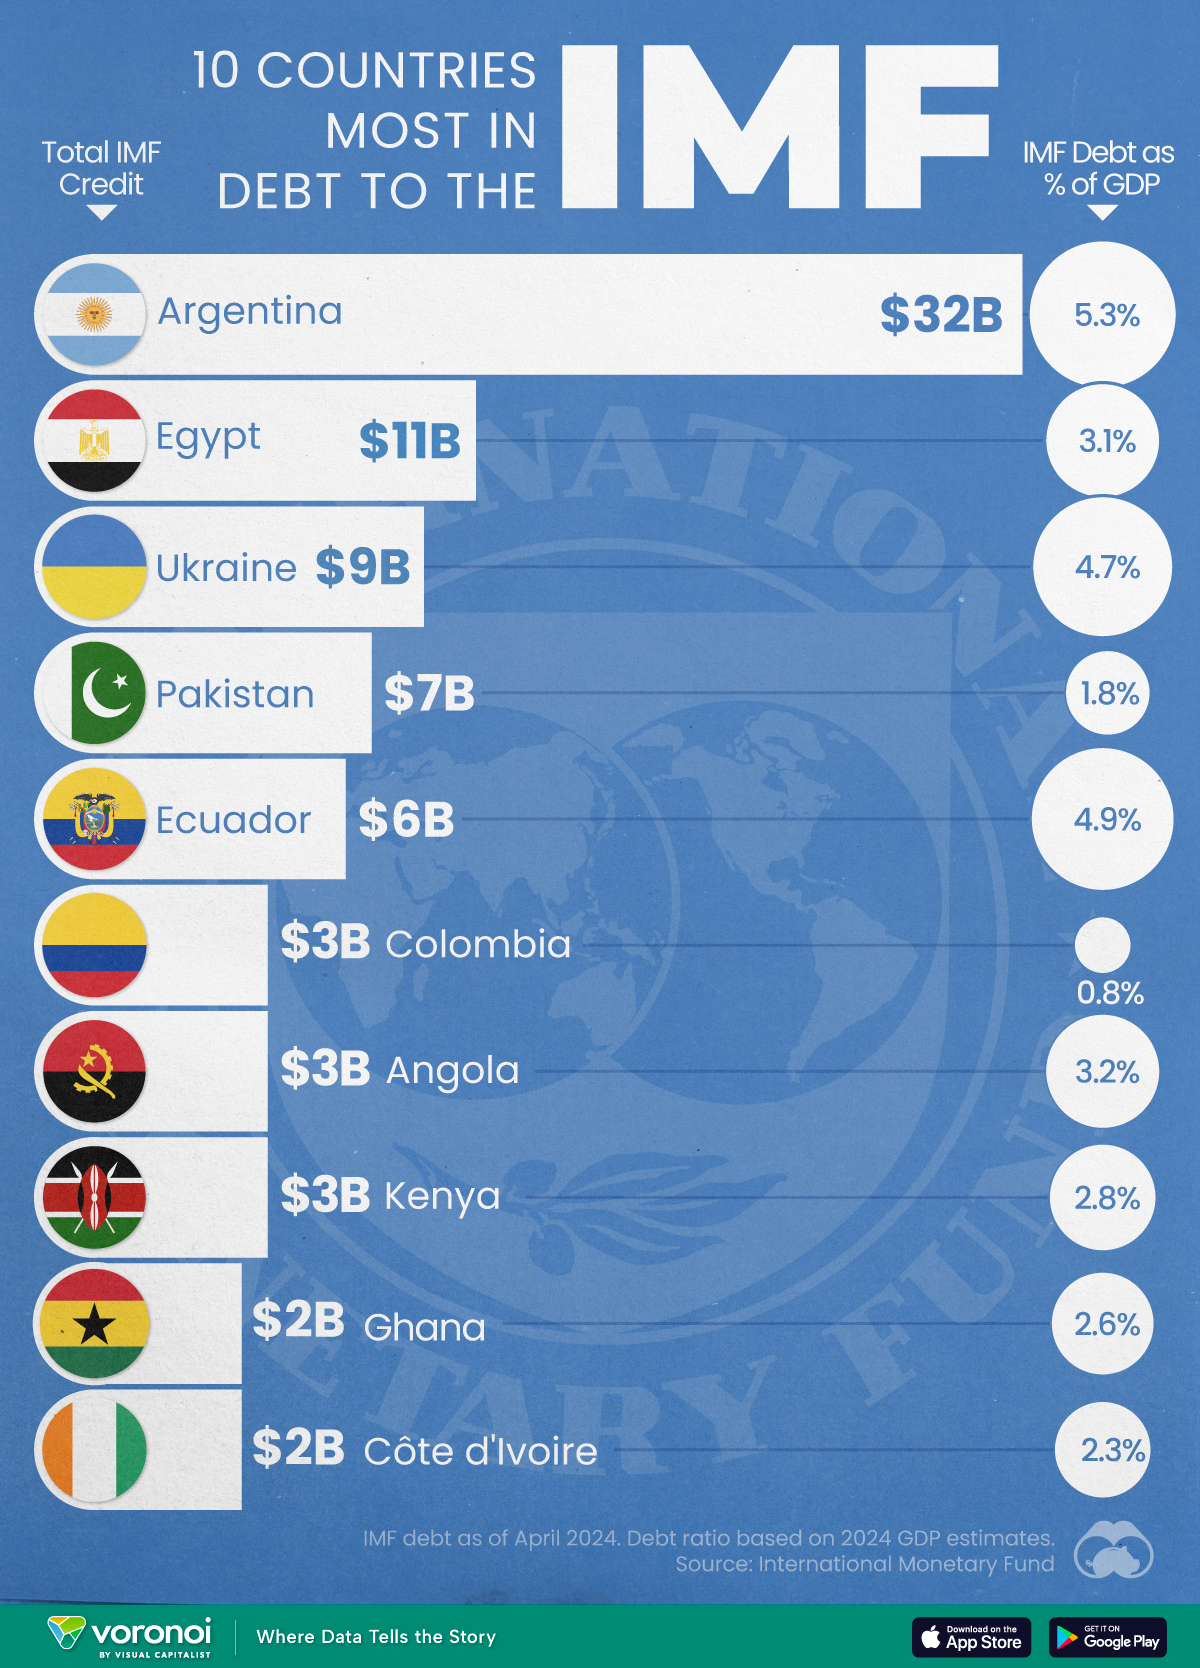 Bar chart showing the 10 countries most in debt to the IMF.